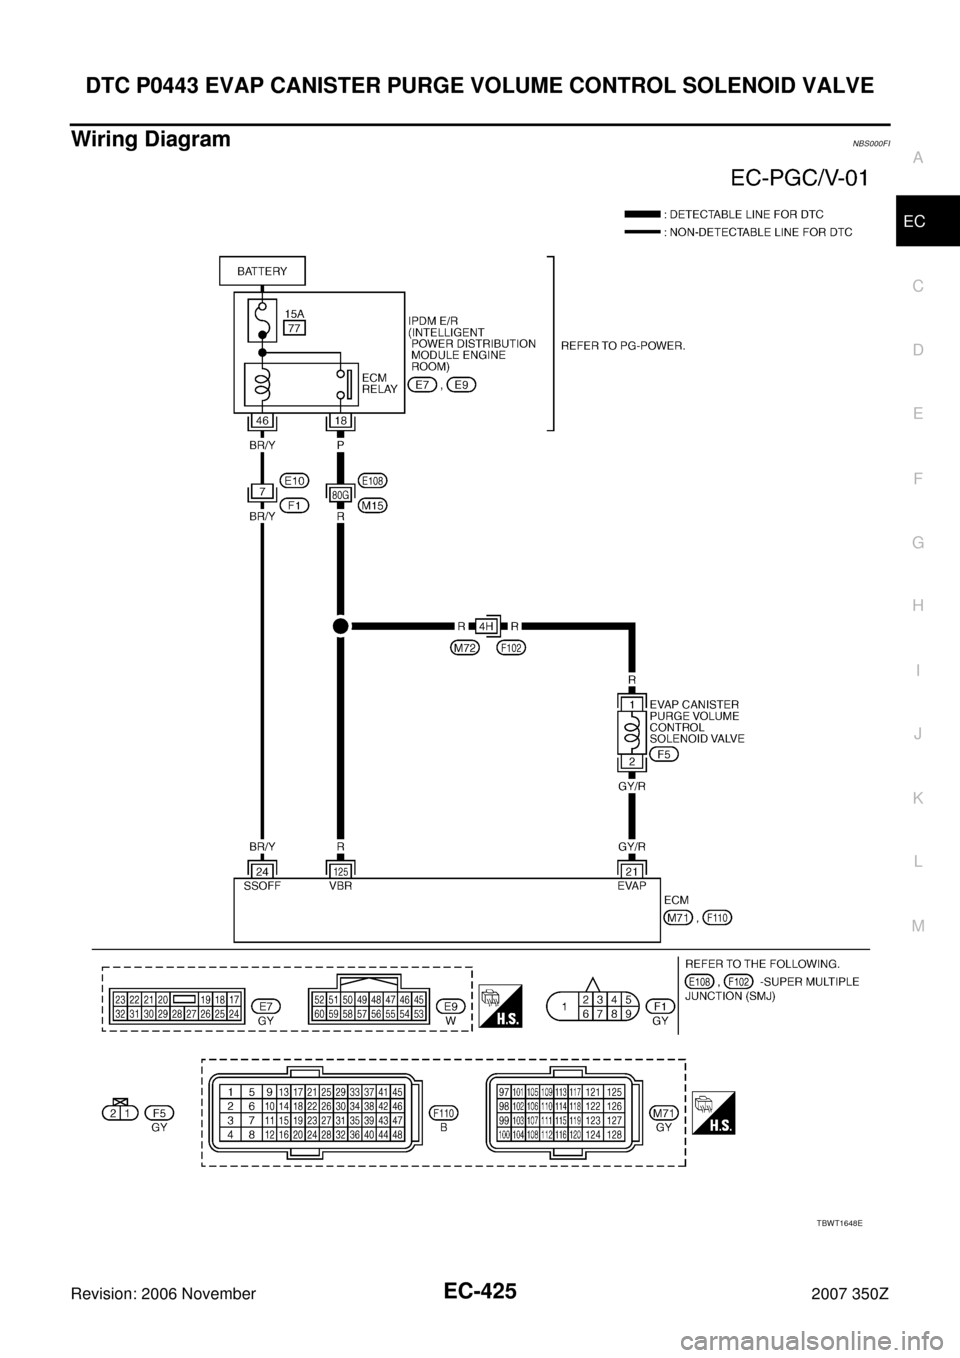 NISSAN 350Z 2007 Z33 Engine Control Workshop Manual DTC P0443 EVAP CANISTER PURGE VOLUME CONTROL SOLENOID VALVE
EC-425
C
D
E
F
G
H
I
J
K
L
MA
EC
Revision: 2006 November2007 350Z
Wiring DiagramNBS000FI
TBWT1648E 